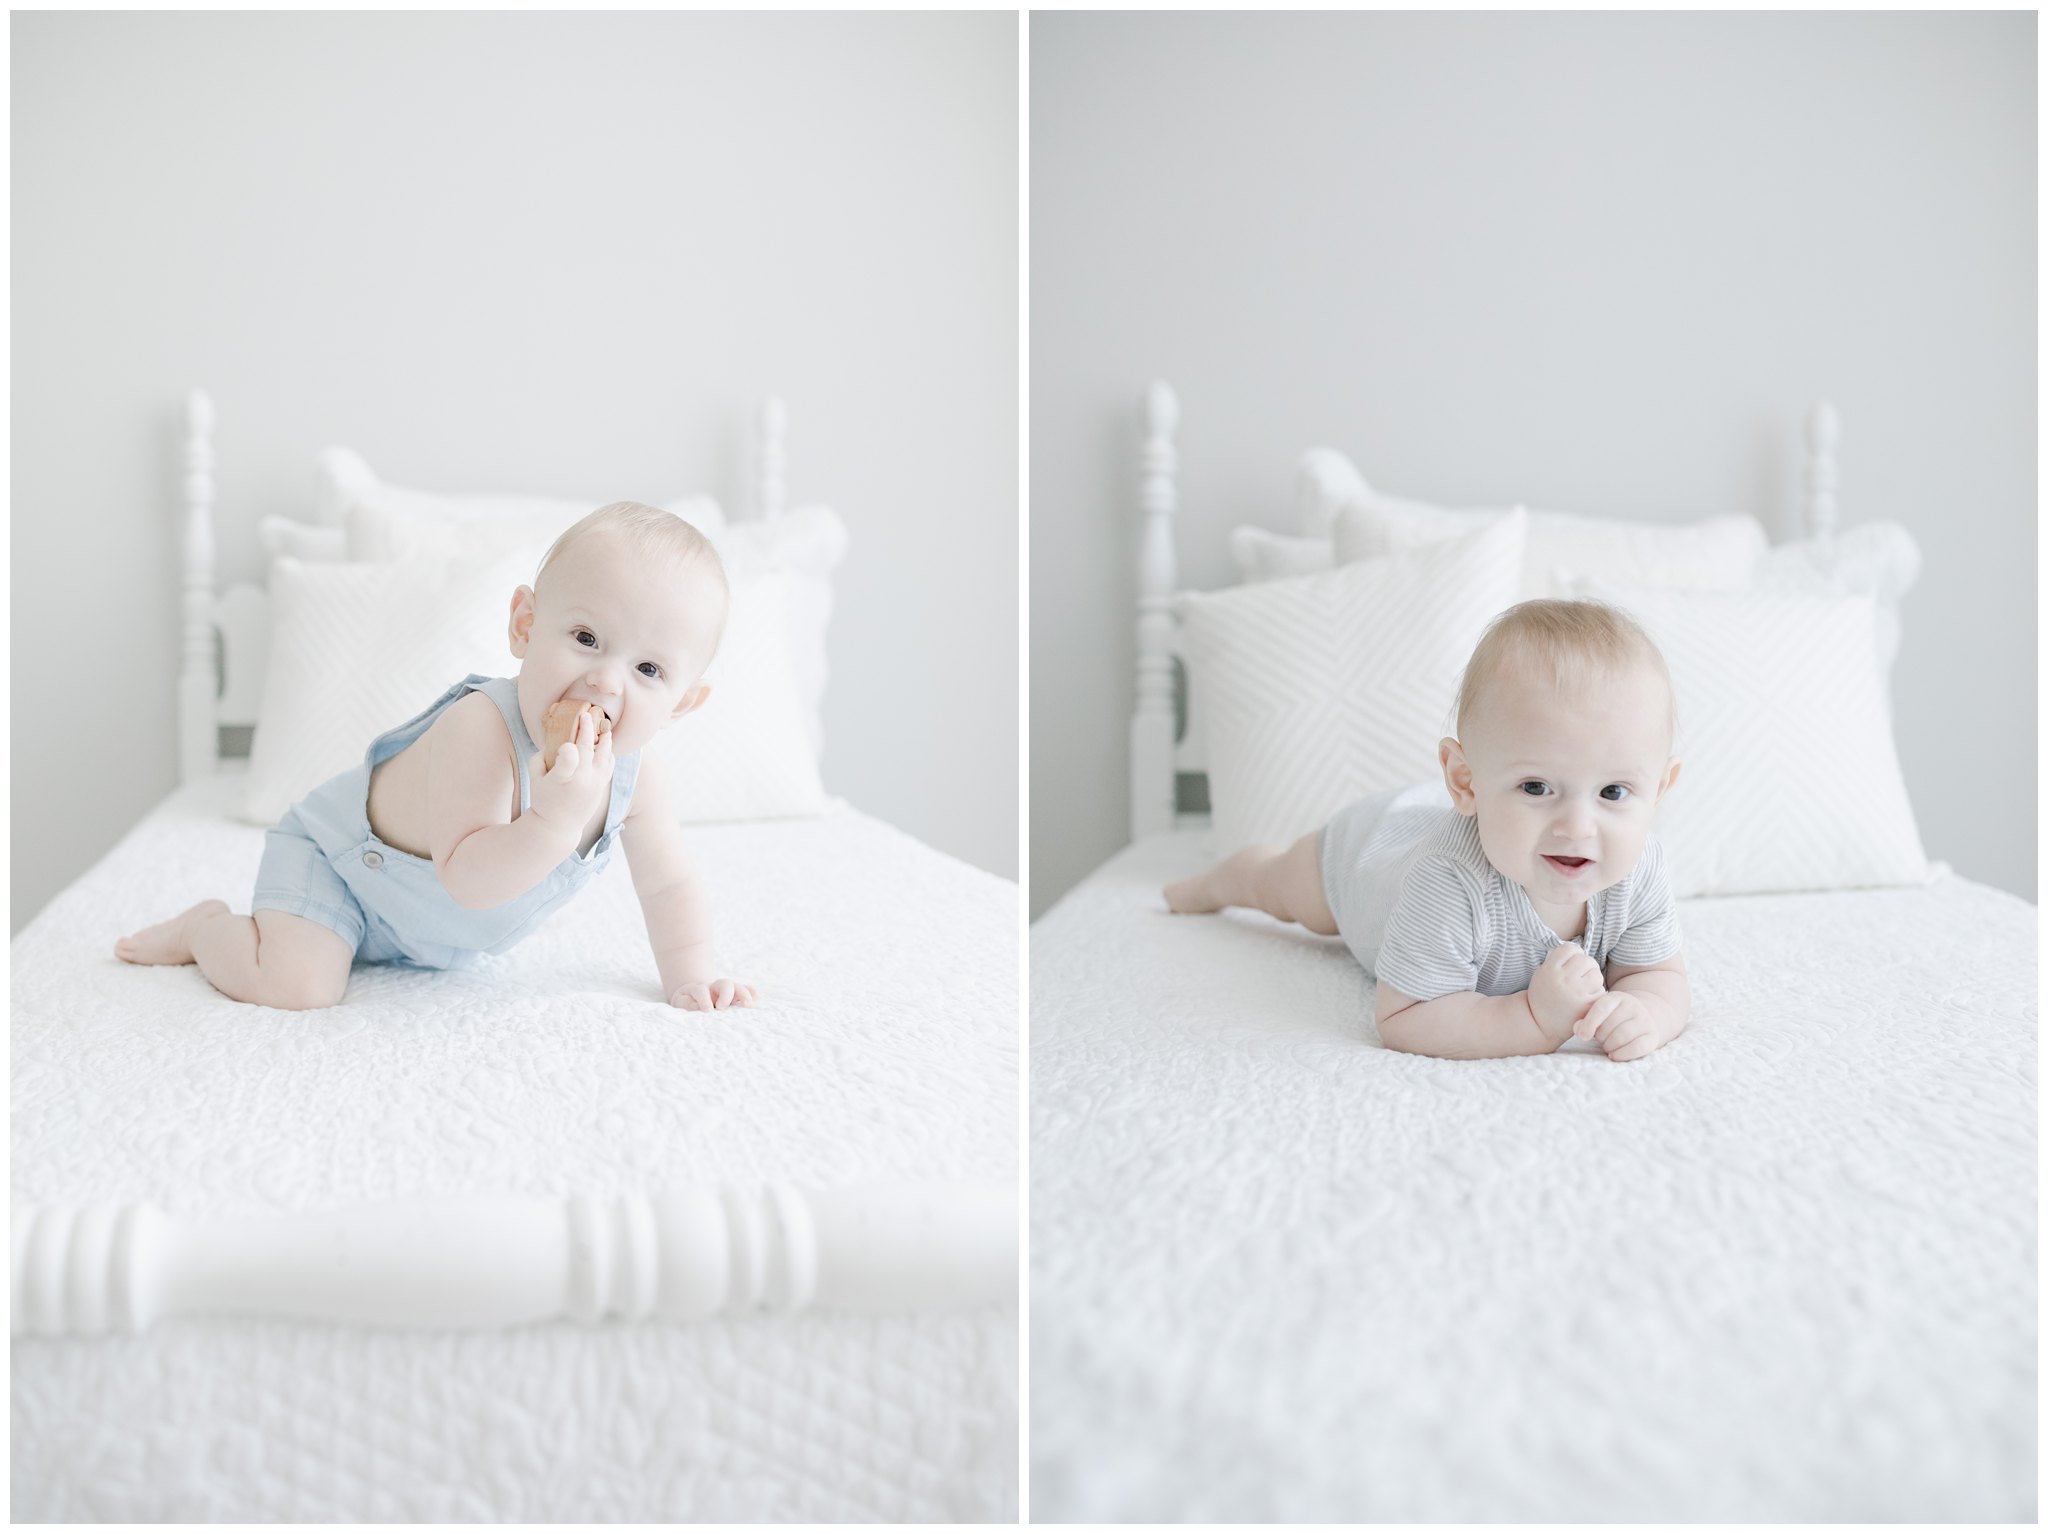 6 months baby on bed photos